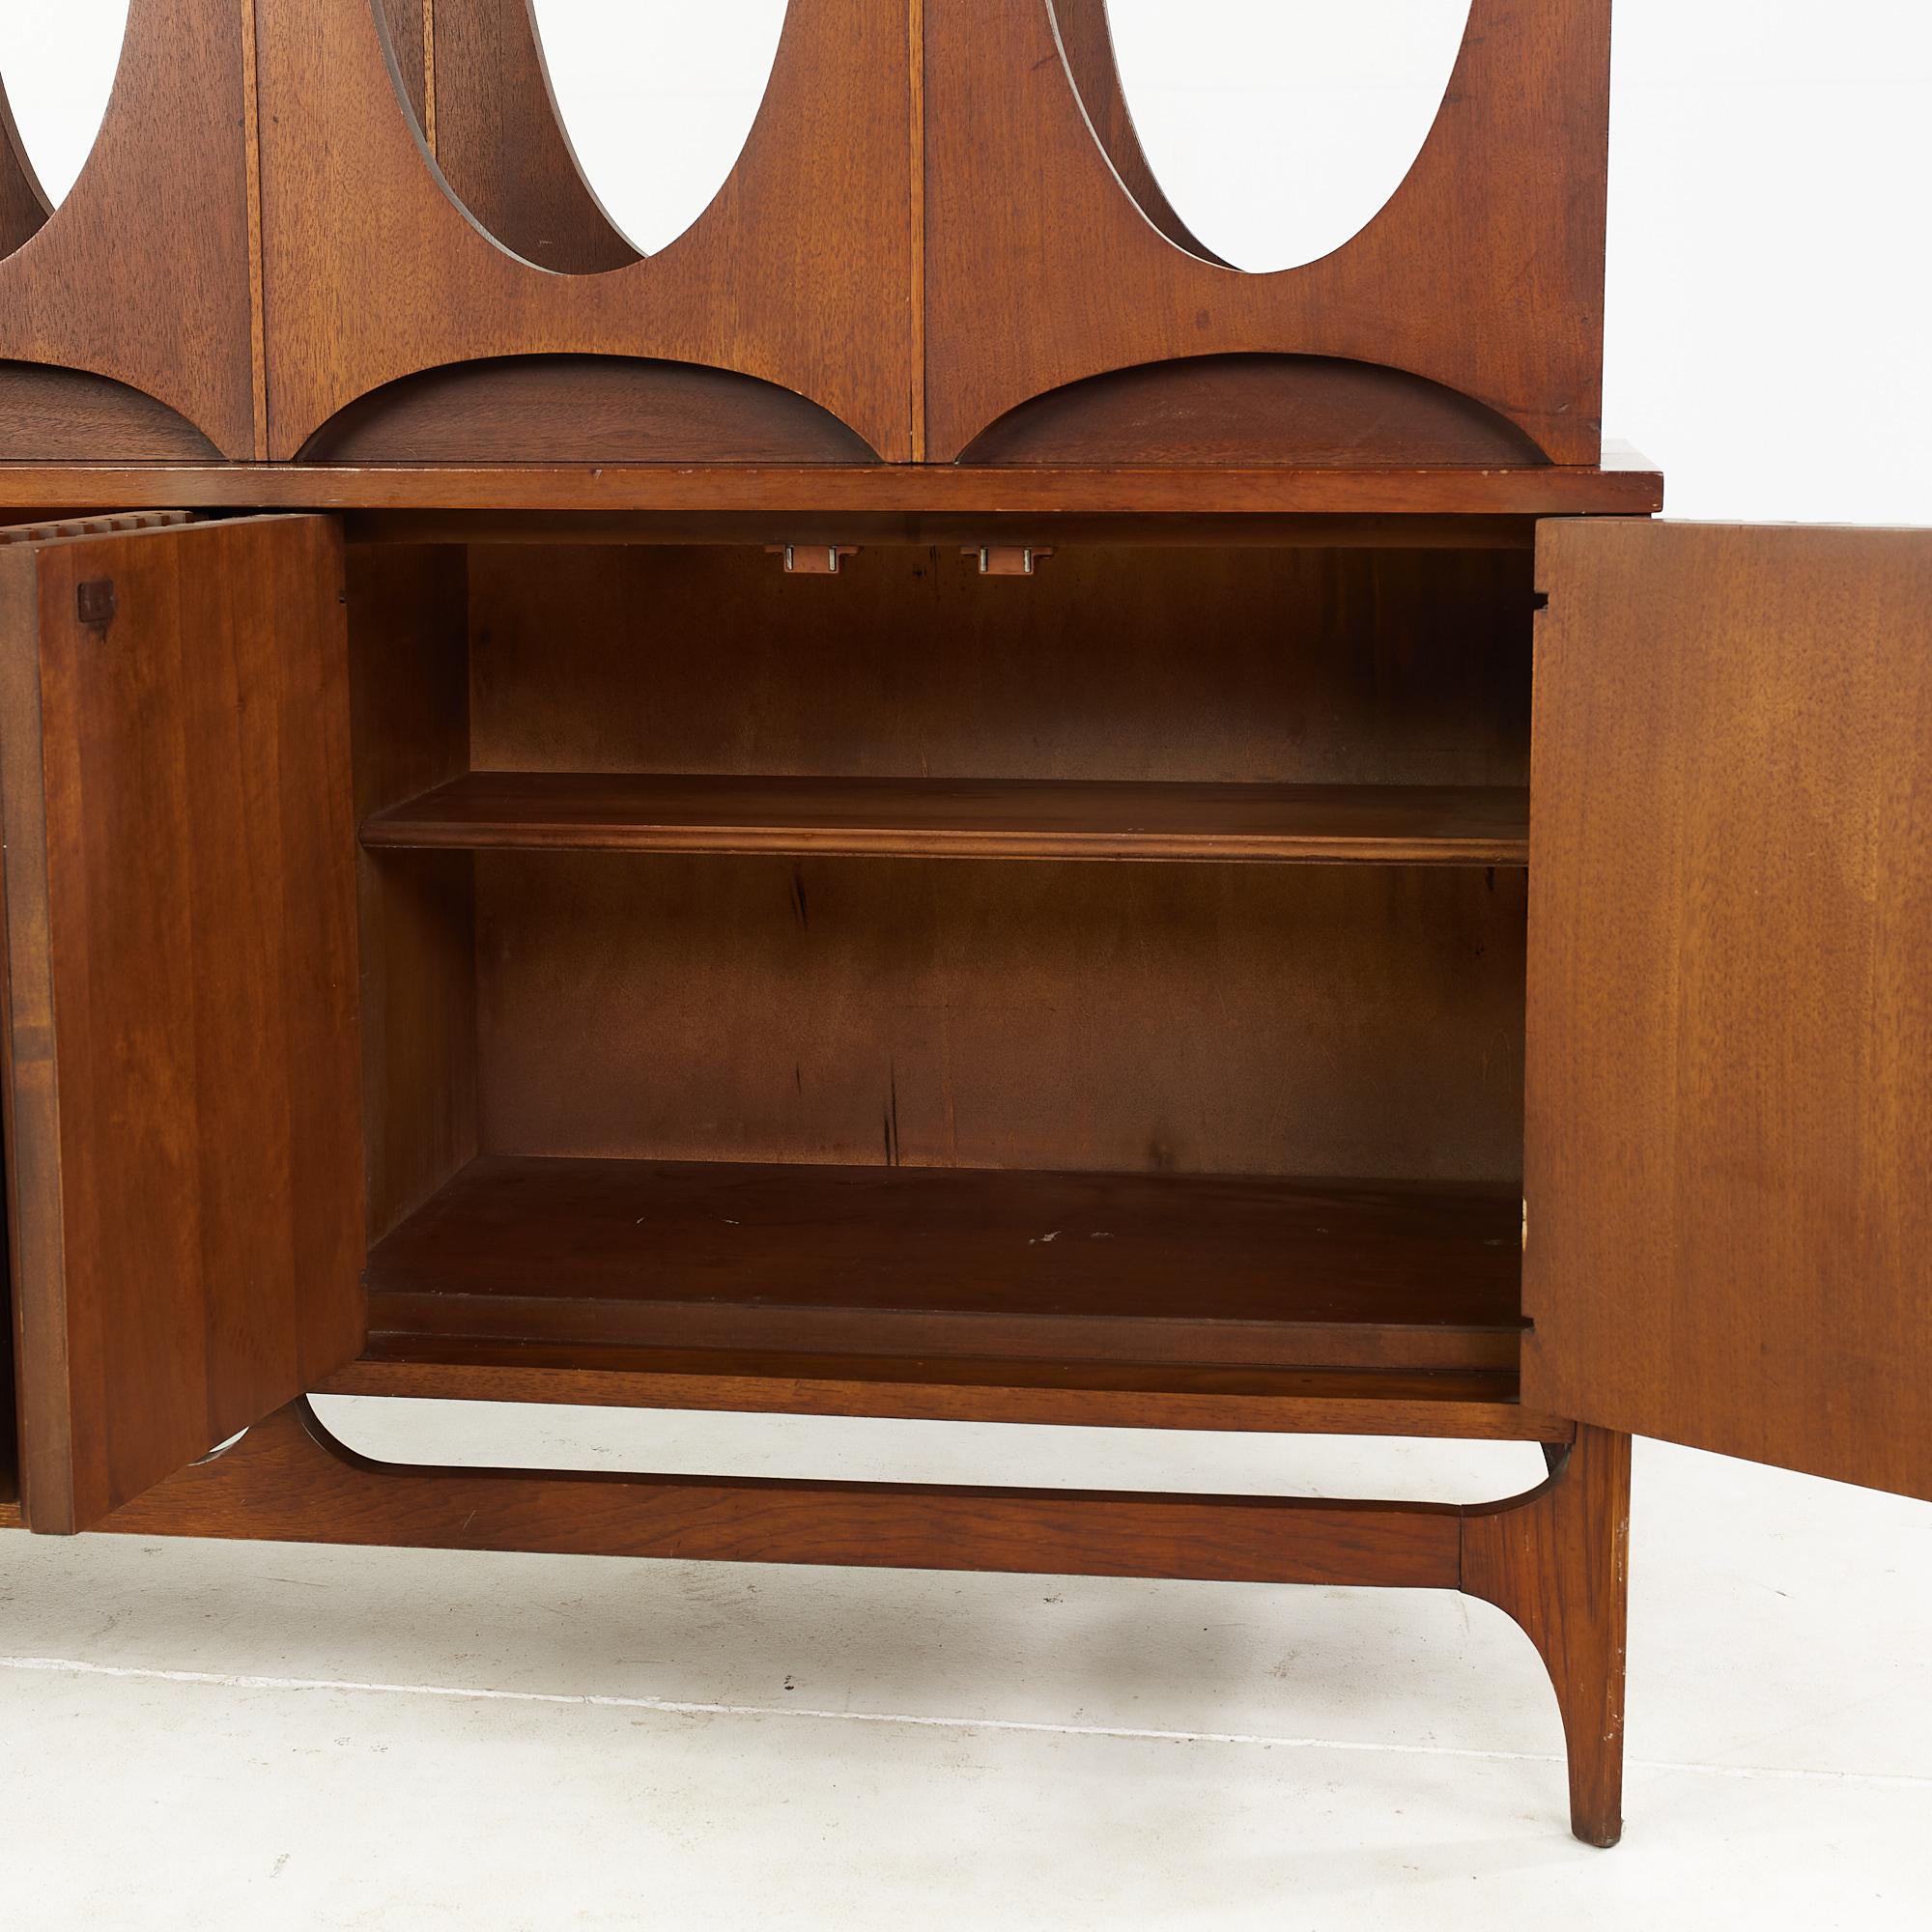 Broyhill Brasilia Mid Century Walnut Room Divider In Good Condition For Sale In Countryside, IL